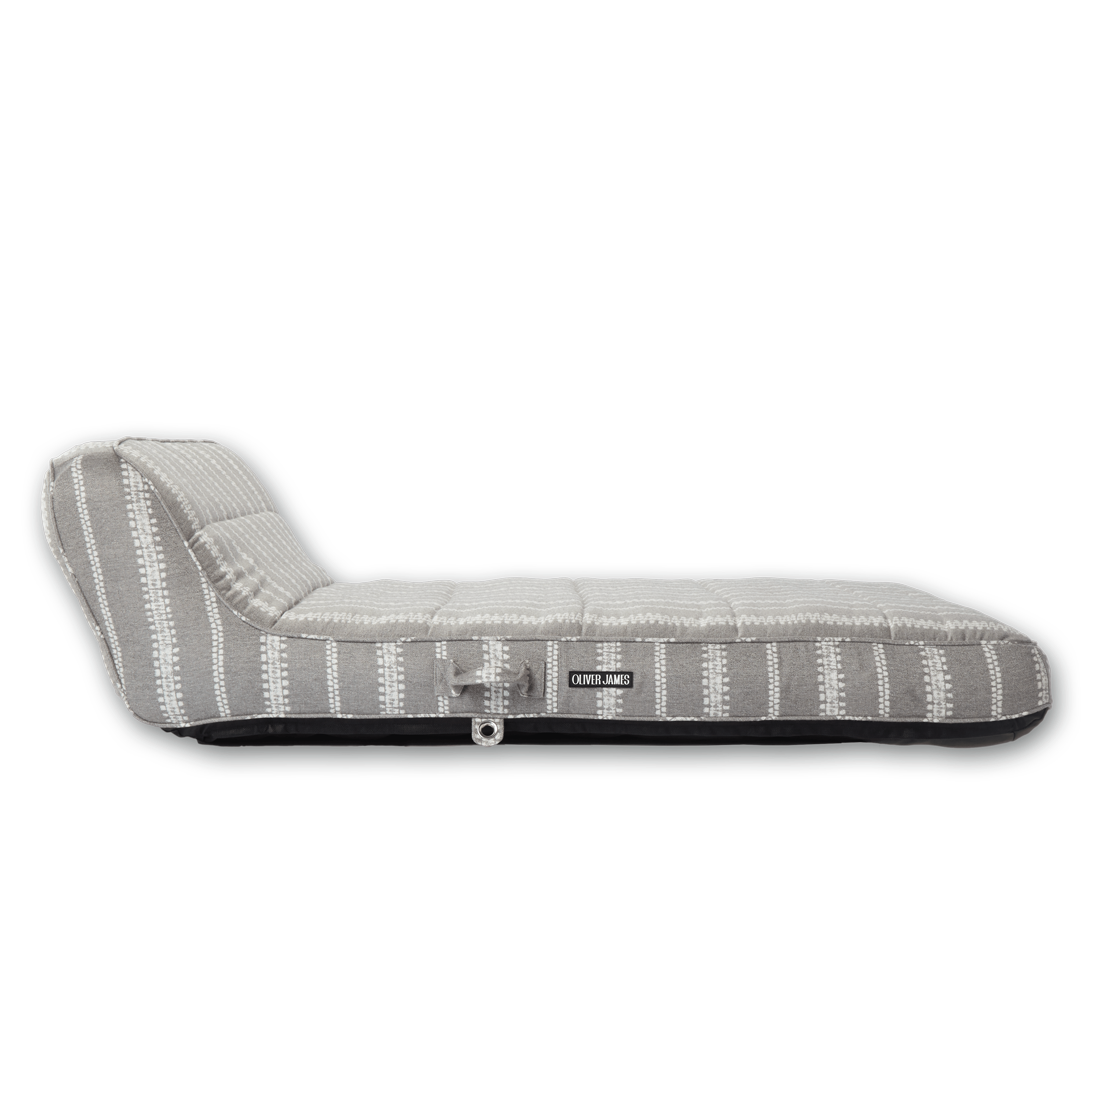 The side profile and backrest angle of a double grey and white luxury pool float.